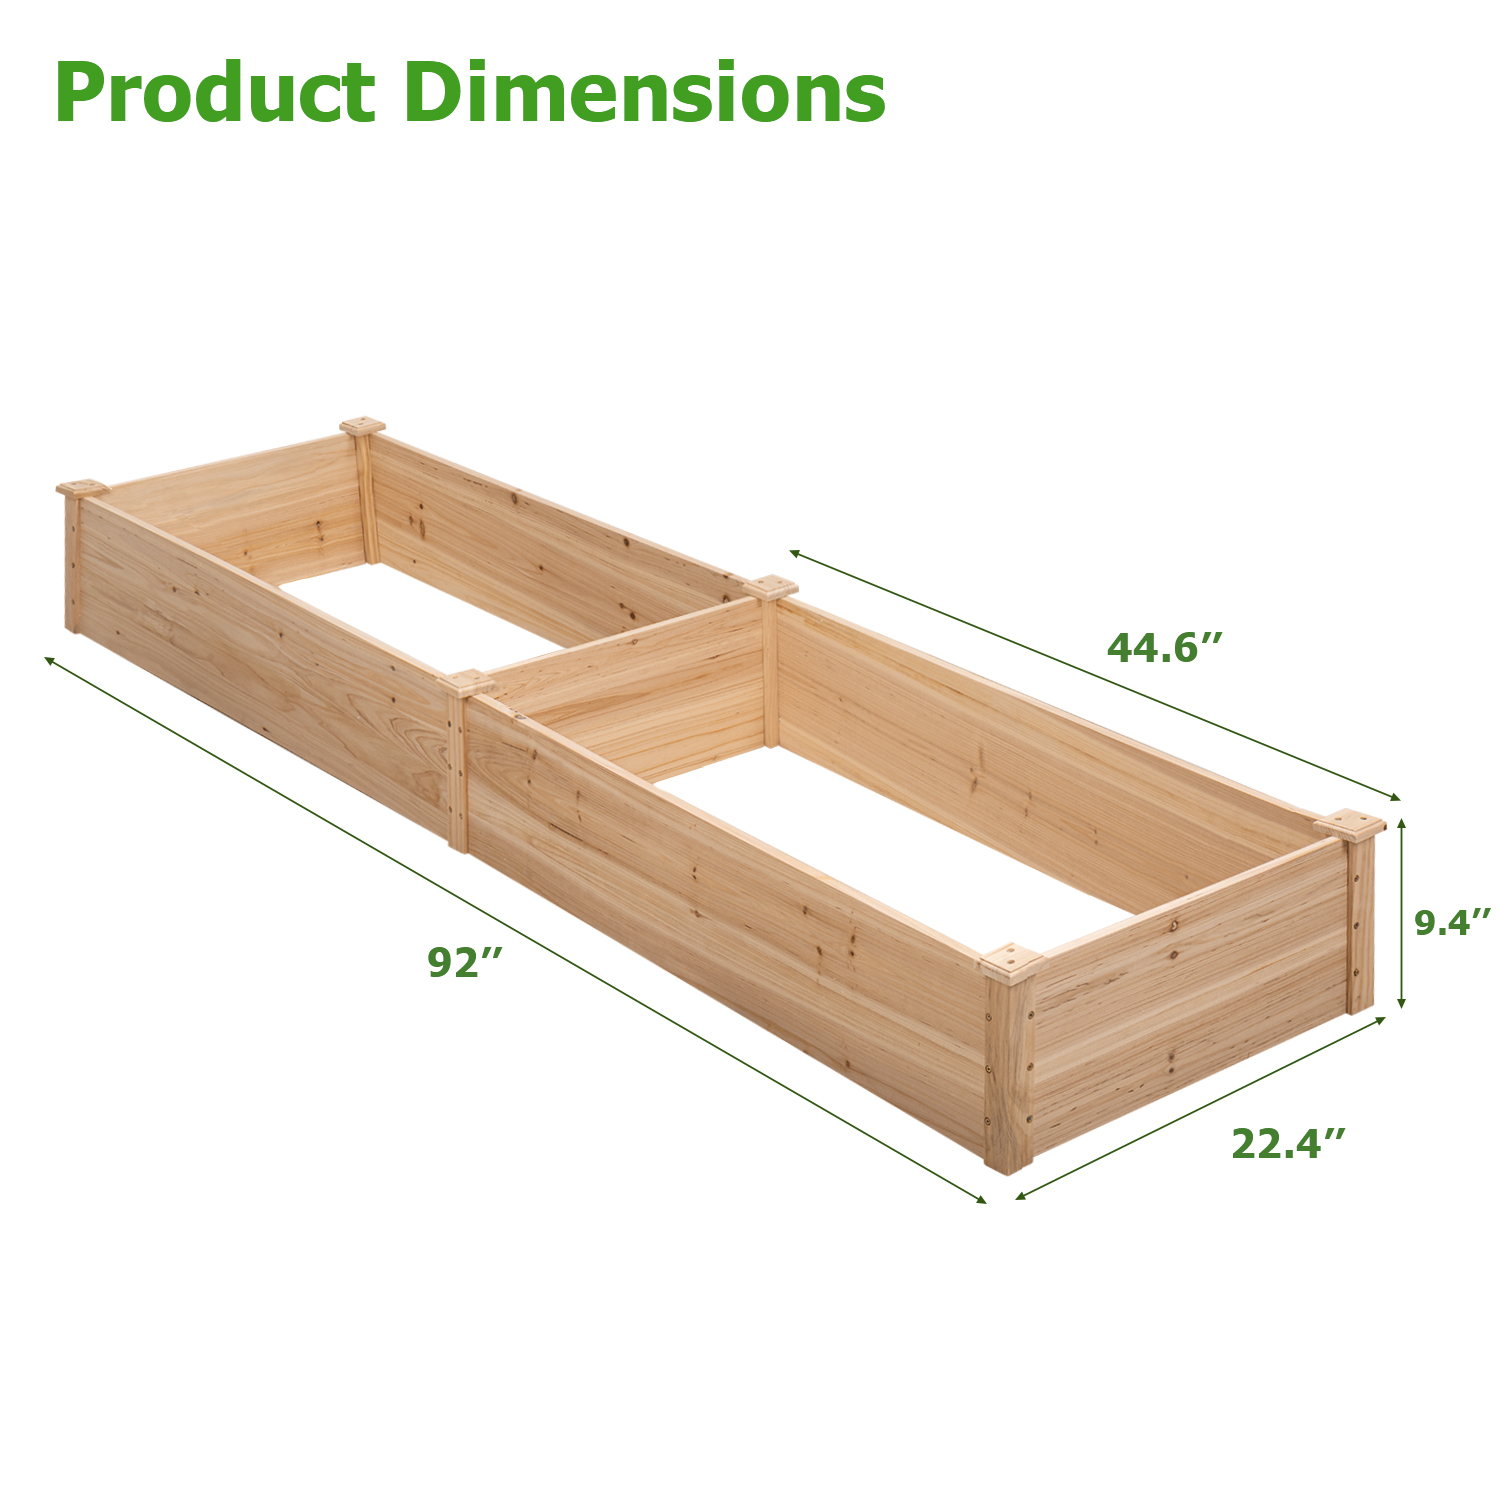 Lacoo Raised Garden Bed 92x22x9in Divisible Wooden Planter Box Outdoor Patio Elevated Garden Box Kit to Grow Flower, Fruits, Herbs and Vegetables for Backyard, Patio, Balcony - Natural - image 5 of 9